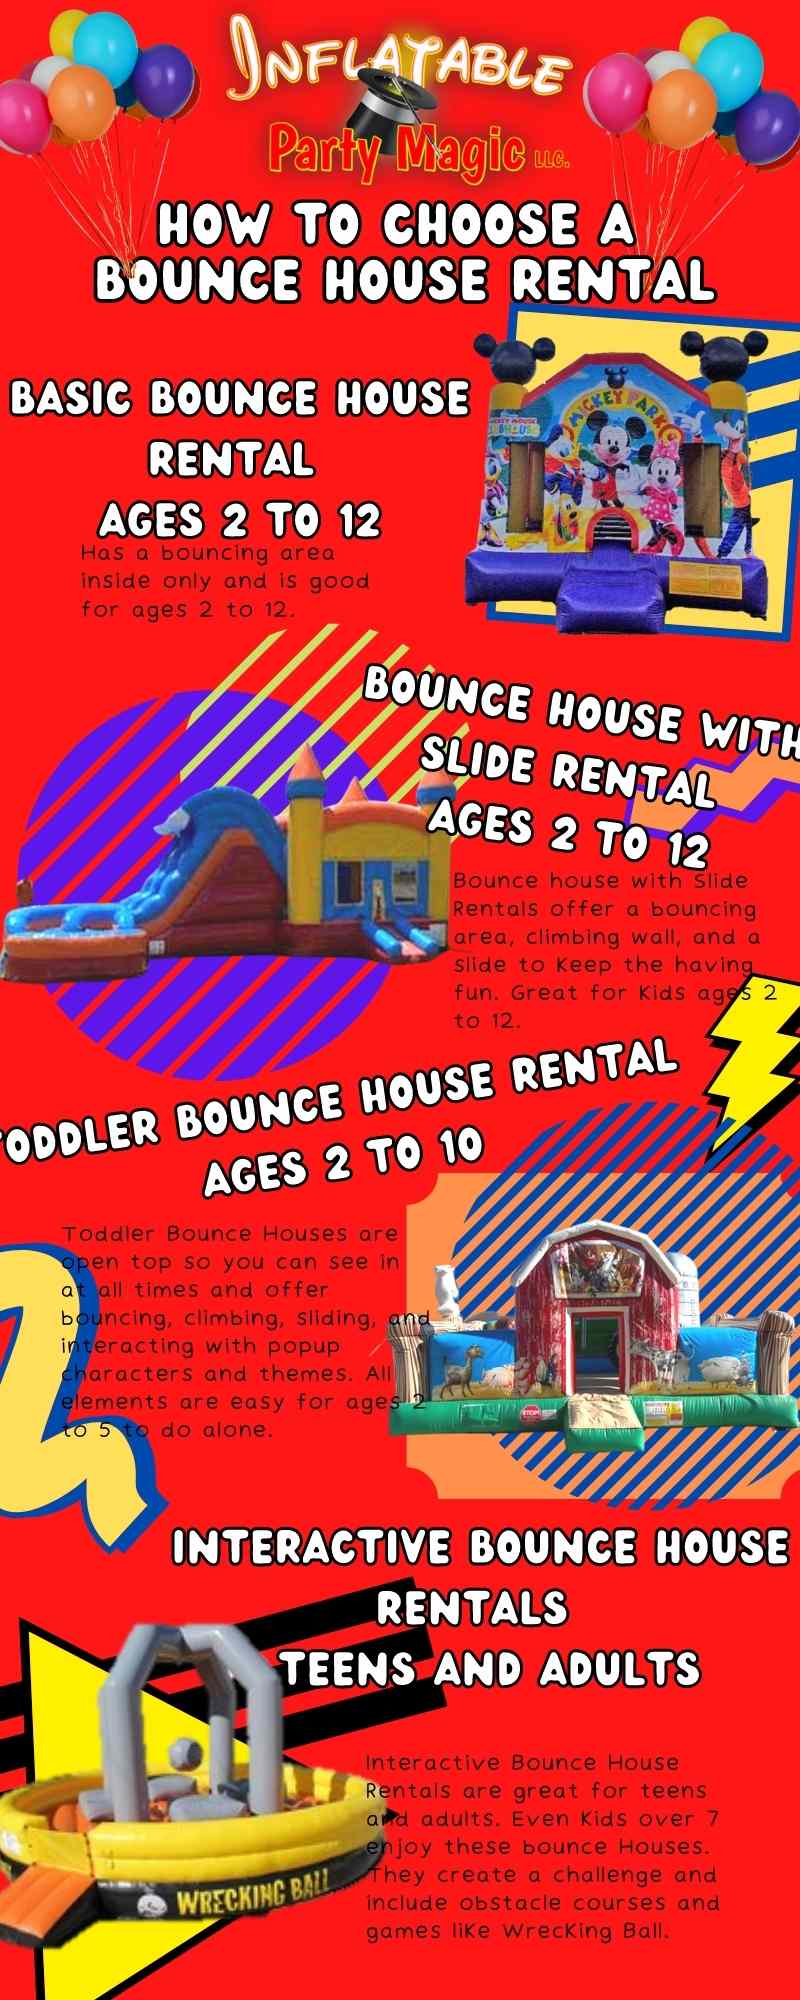 How to Choose a Bounce House based on age